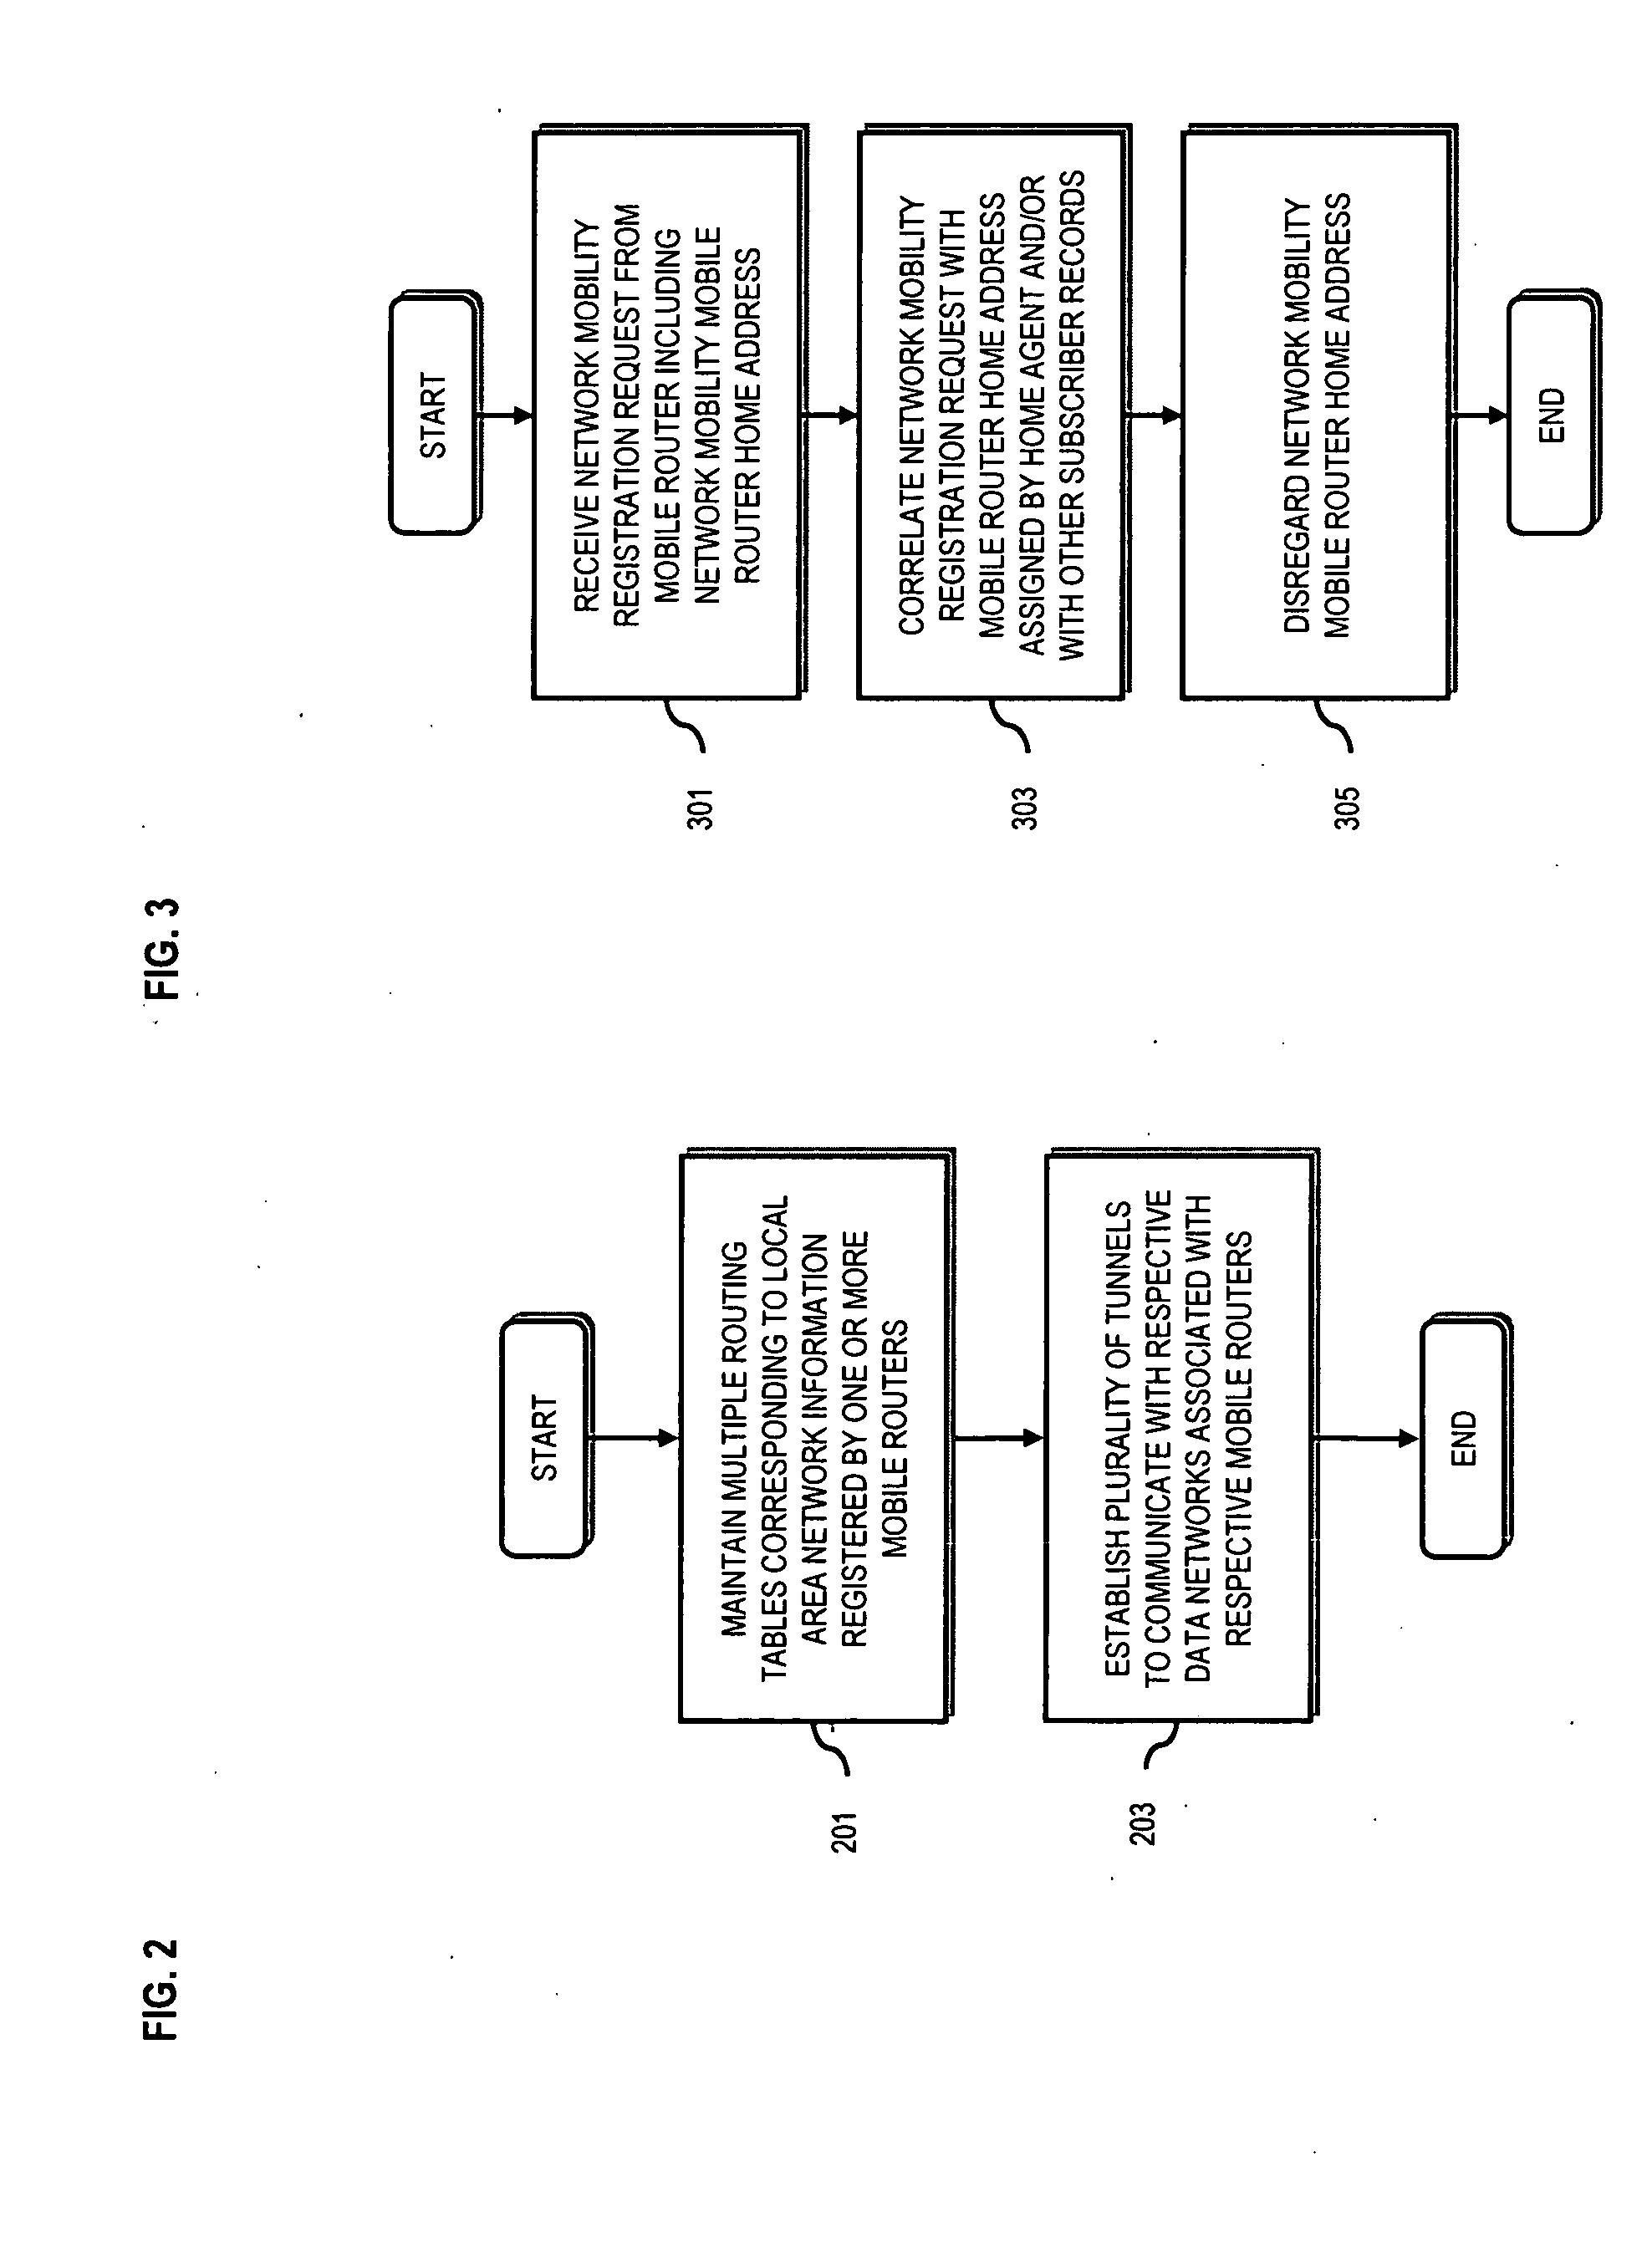 System and method for providing network mobility